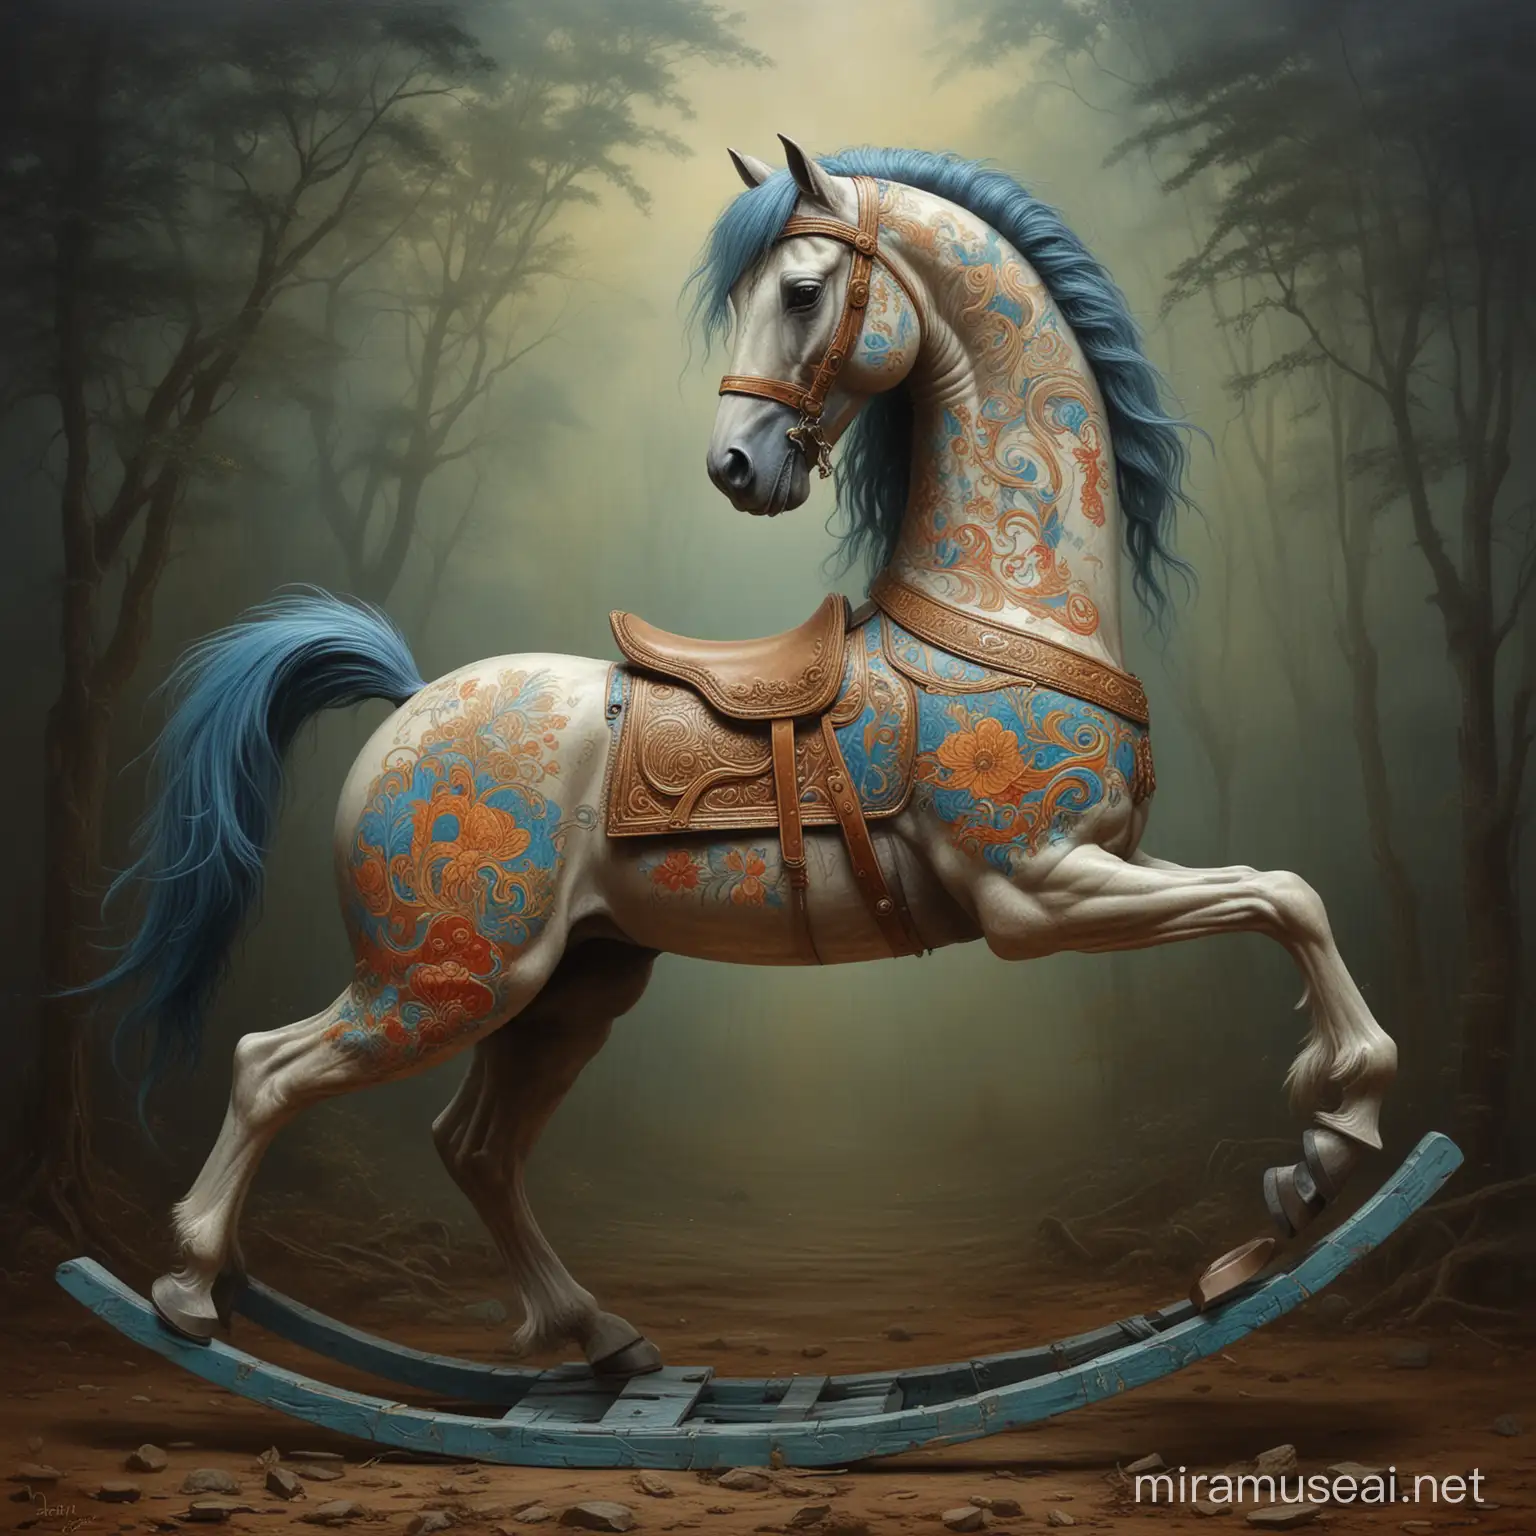 rocking horse painted in the style of Beksiński's paintings